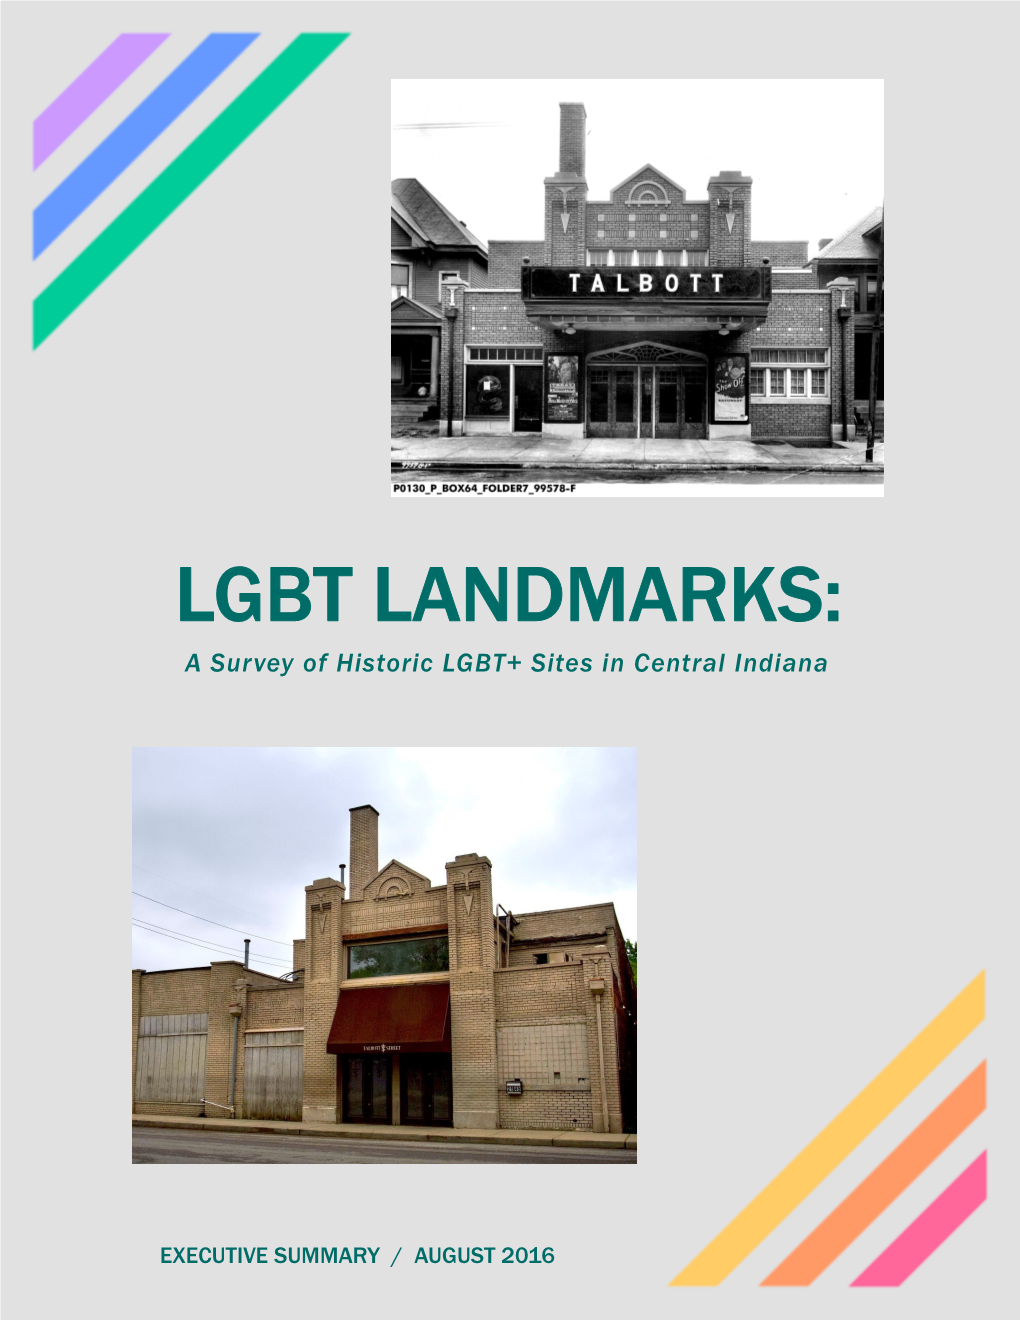 LGBT LANDMARKS: a Survey of Historic LGBT+ Sites in Central Indiana